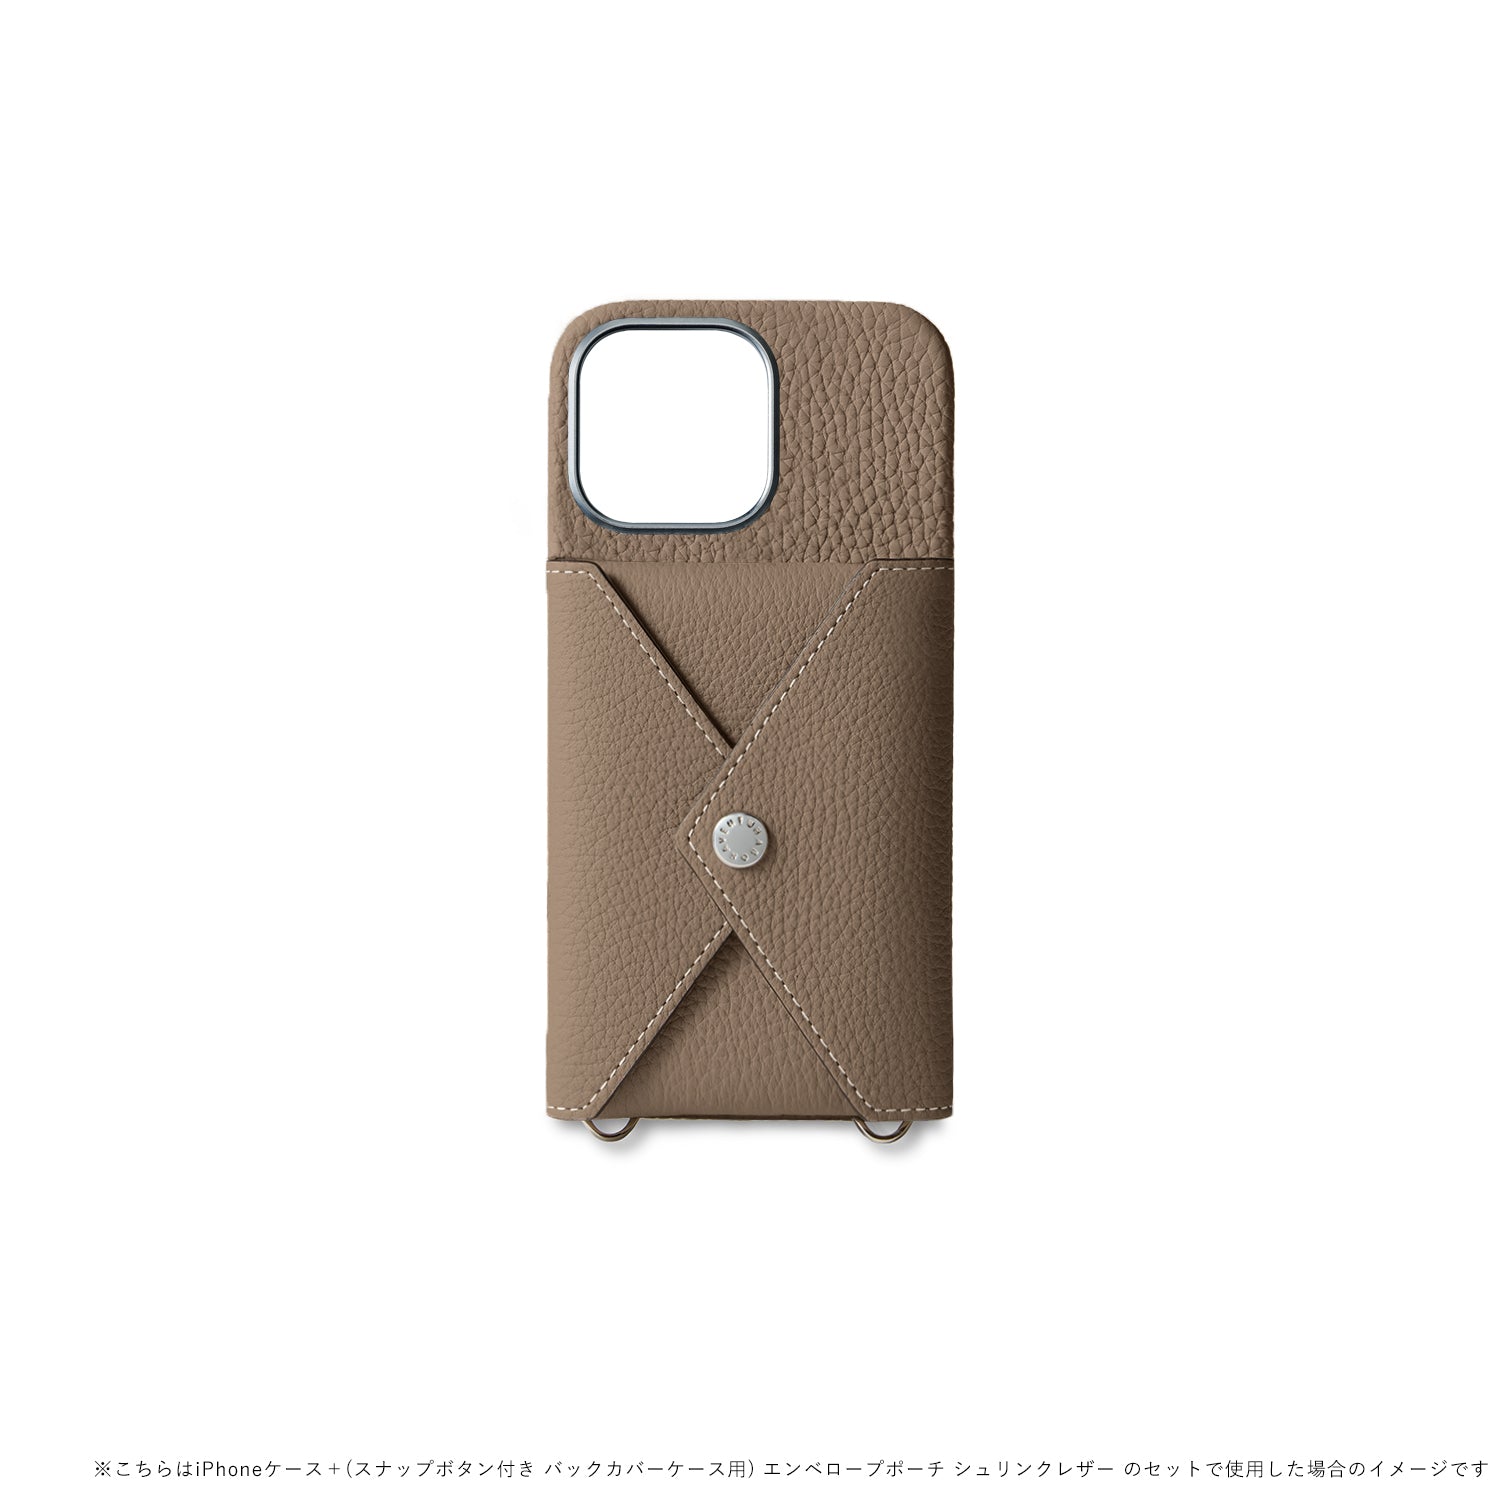 iPhone 15 Pro Max) Snap button back cover case in shrink leather